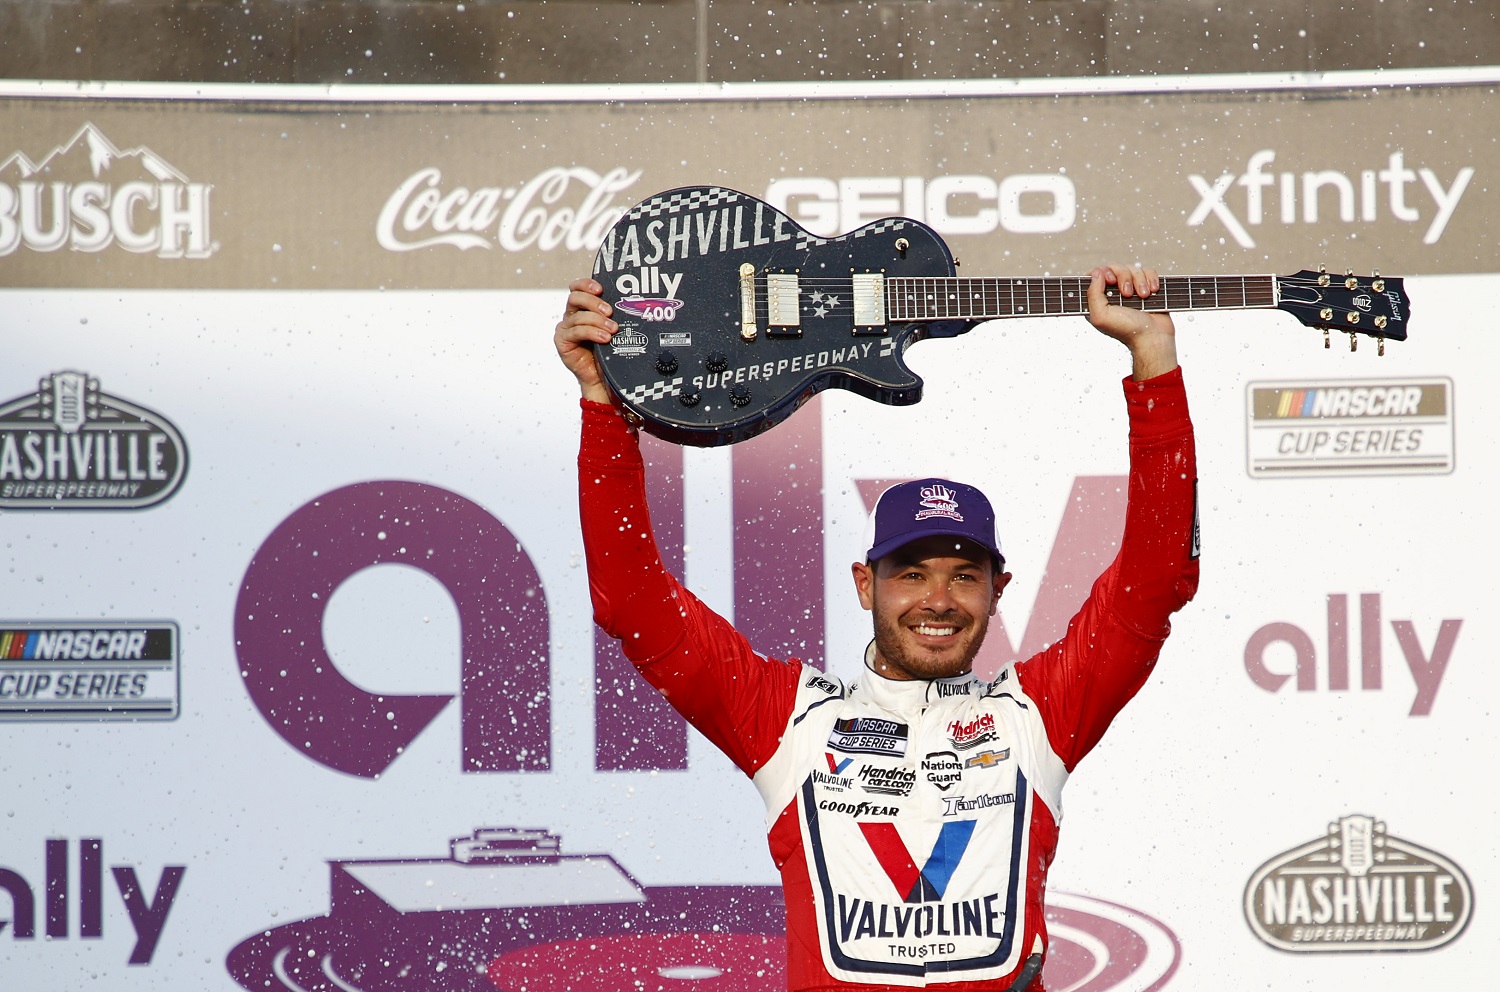 Kyle Larson celebrates in victory lane after winning the NASCAR Cup Series Ally 400 at Nashville Superspeedway on June 20, 2021, in Lebanon, Tennessee. | Jared C. Tilton/Getty Images